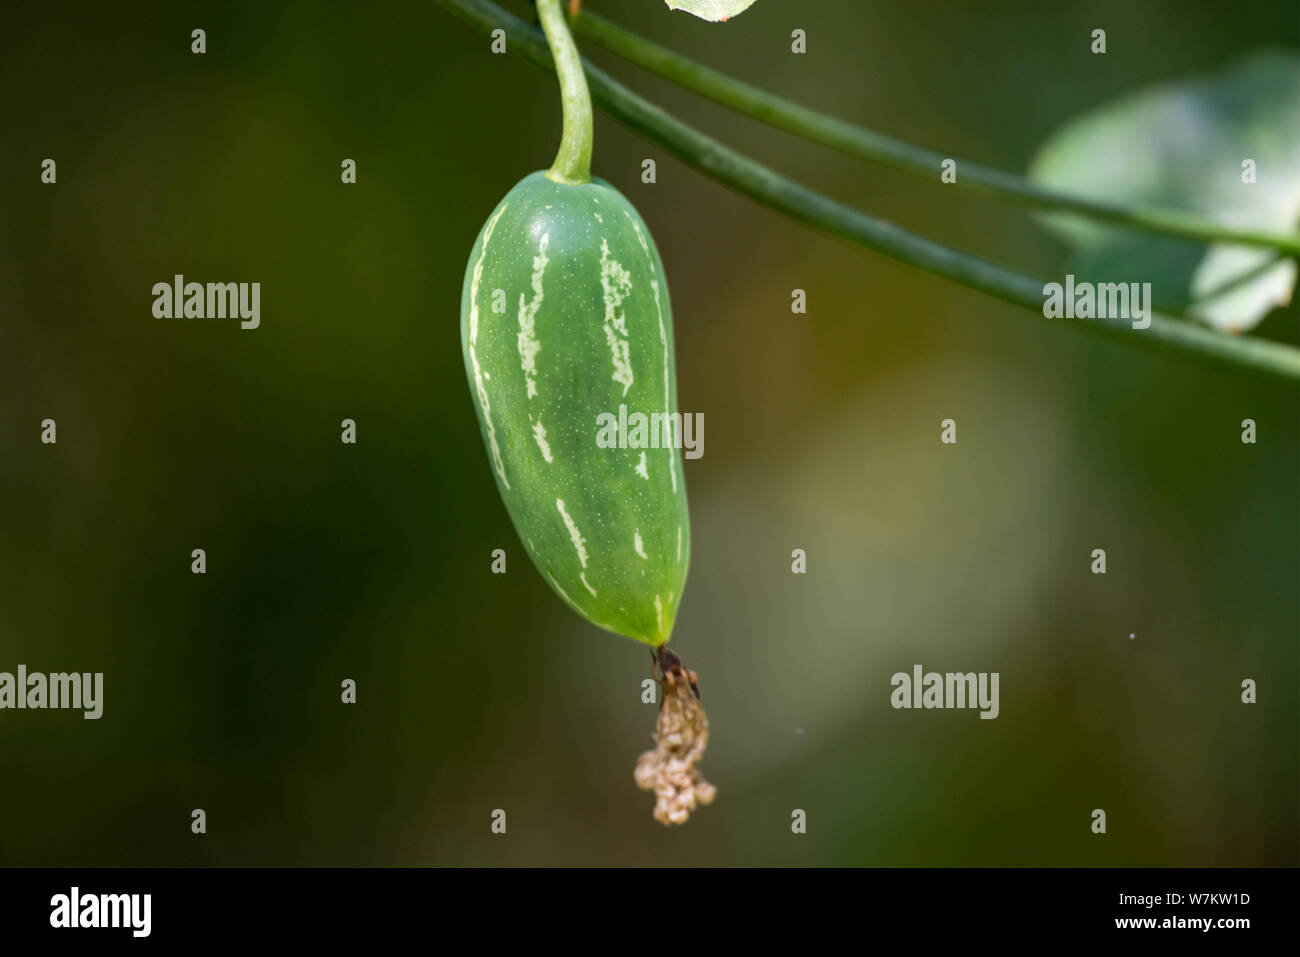 The fruit of the plant Coccinia grandis close-up. Thailand. Stock Photo